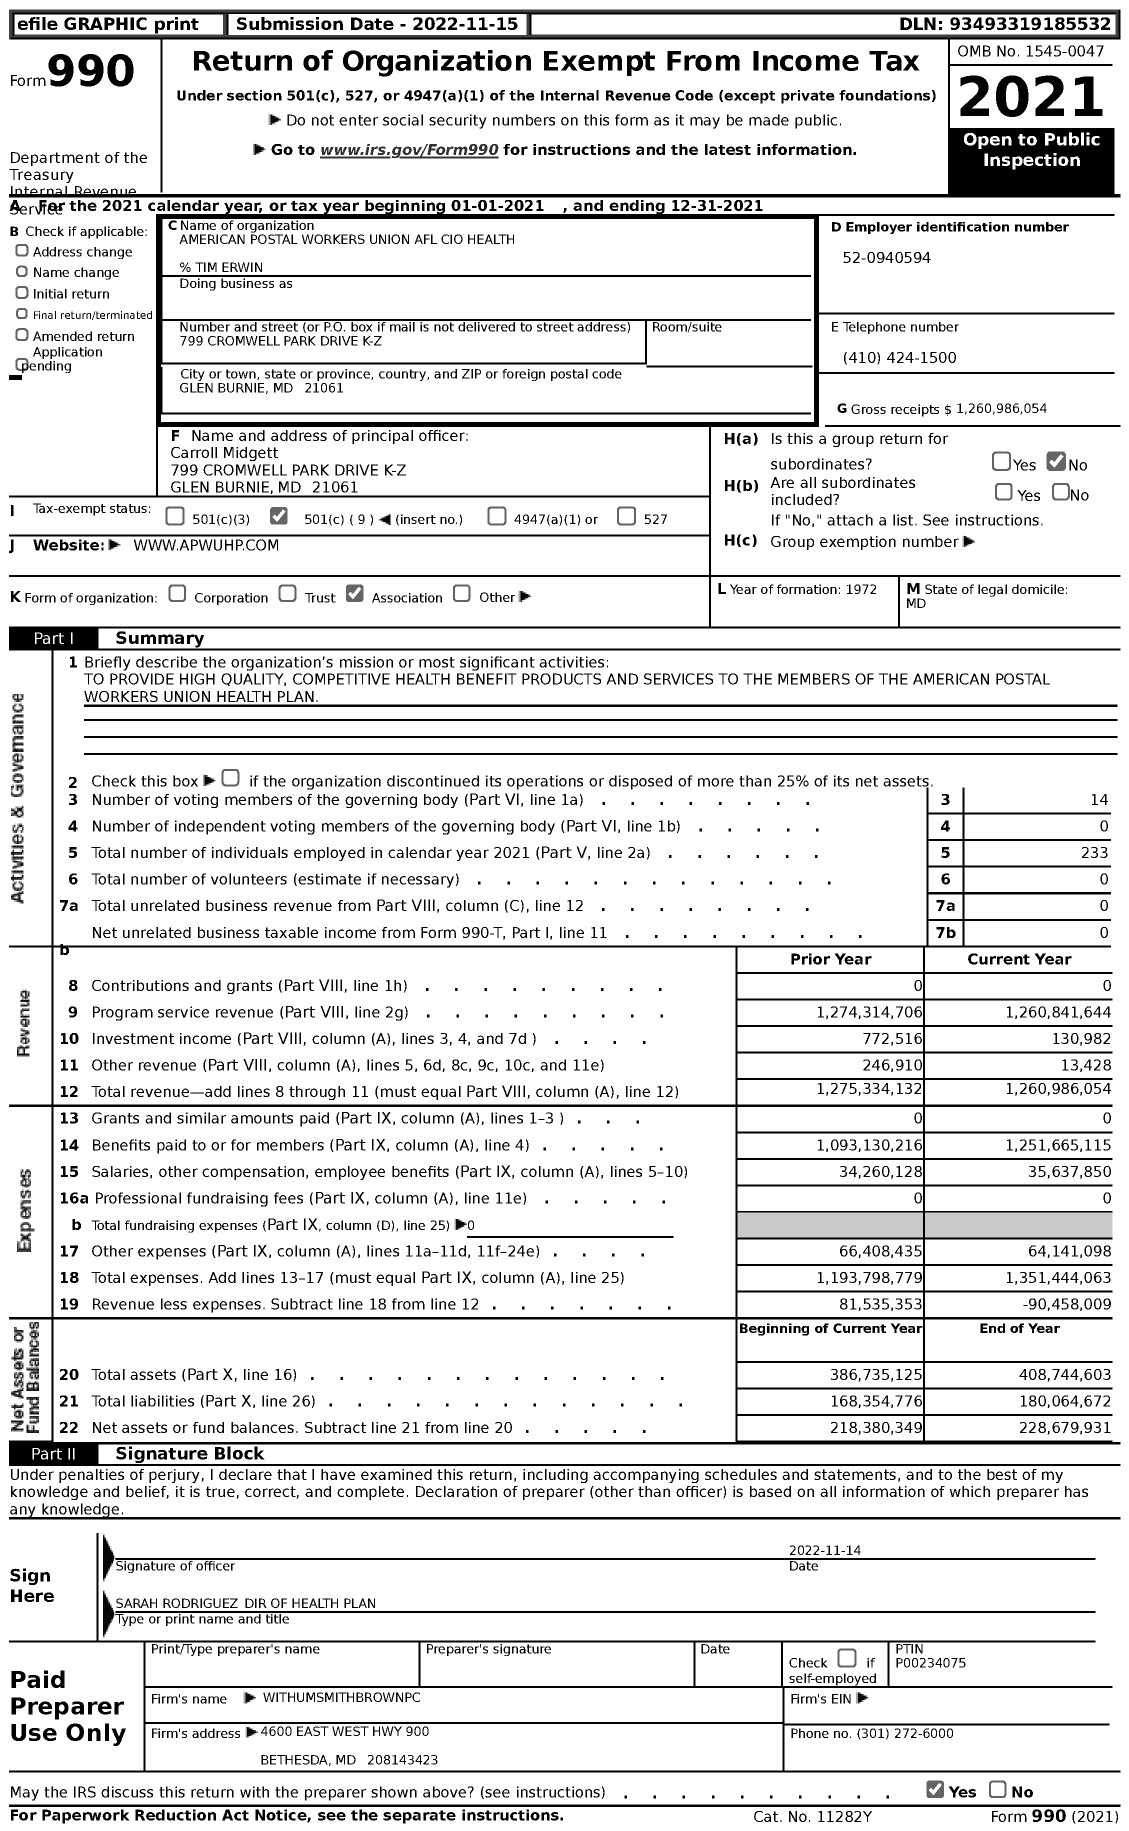 Image of first page of 2021 Form 990 for American Postal Workers Union Health Plan (APWU)